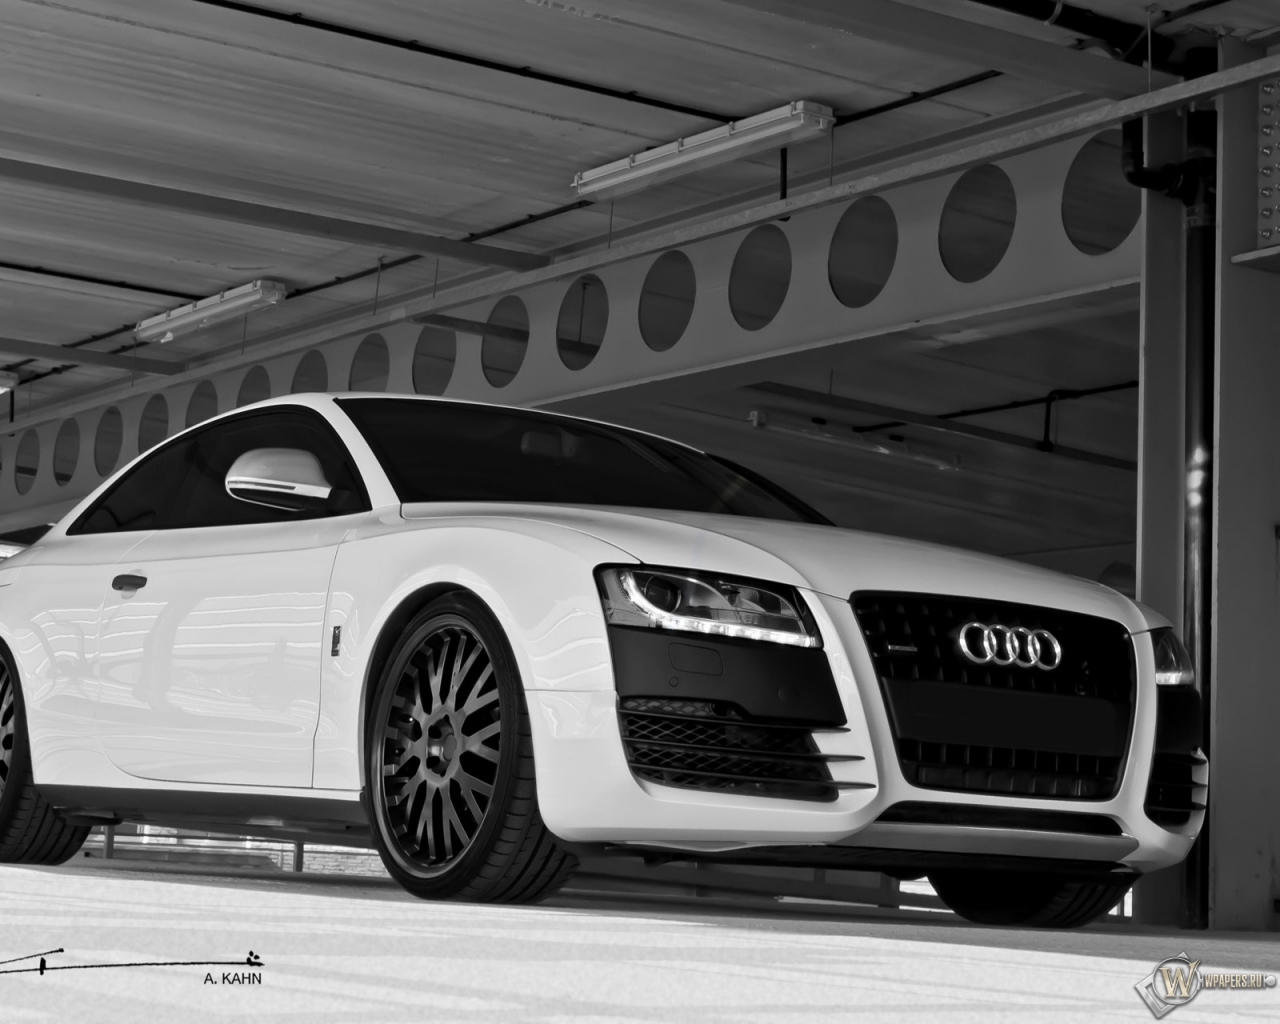 2011 Project Kahn Audi A5 Coupe Sport - Front Angle 1280x1024